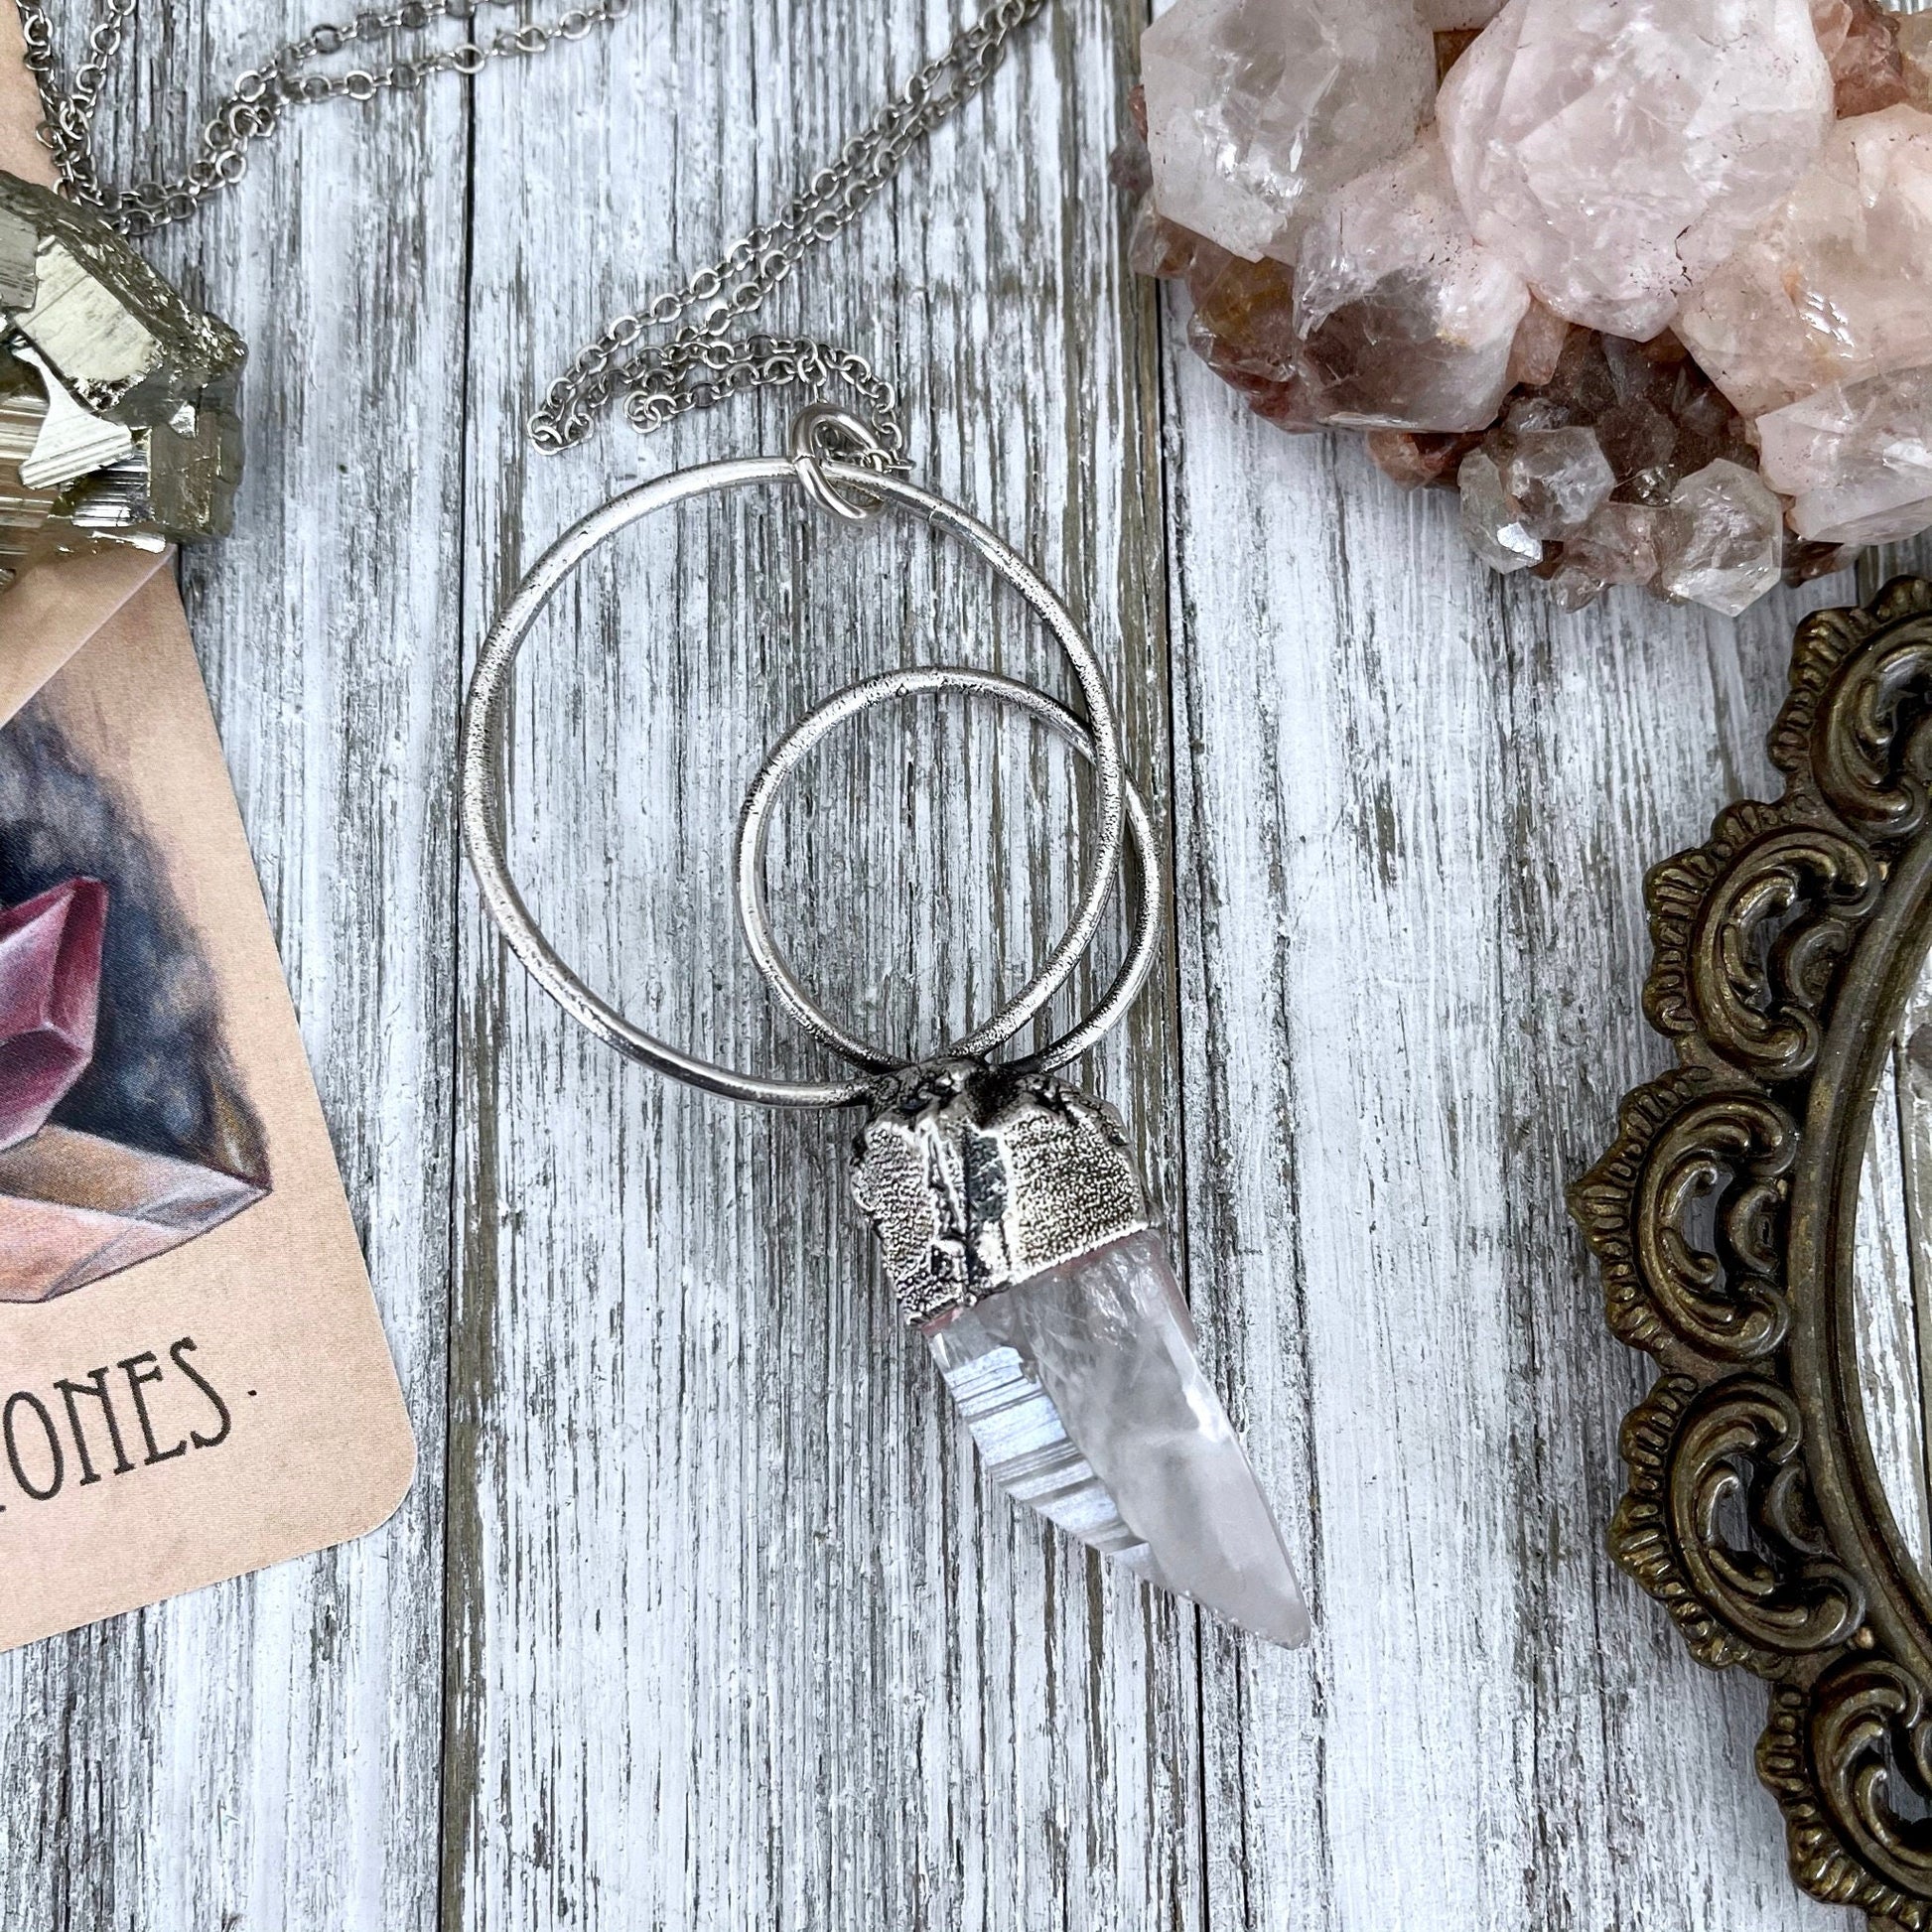 Bohemian Jewelry, Boho Crystal Jewelry, Crystal Necklaces, Etsy ID: 1053127843, FOXLARK- NECKLACES, Gift For Her, Healing Crystal, Jewelry, Necklaces, Quartz Jewelry, Quartz Necklace, Raw Clear Quartz, Raw Crystal Jewelry, Raw crystal necklace, Raw Stone